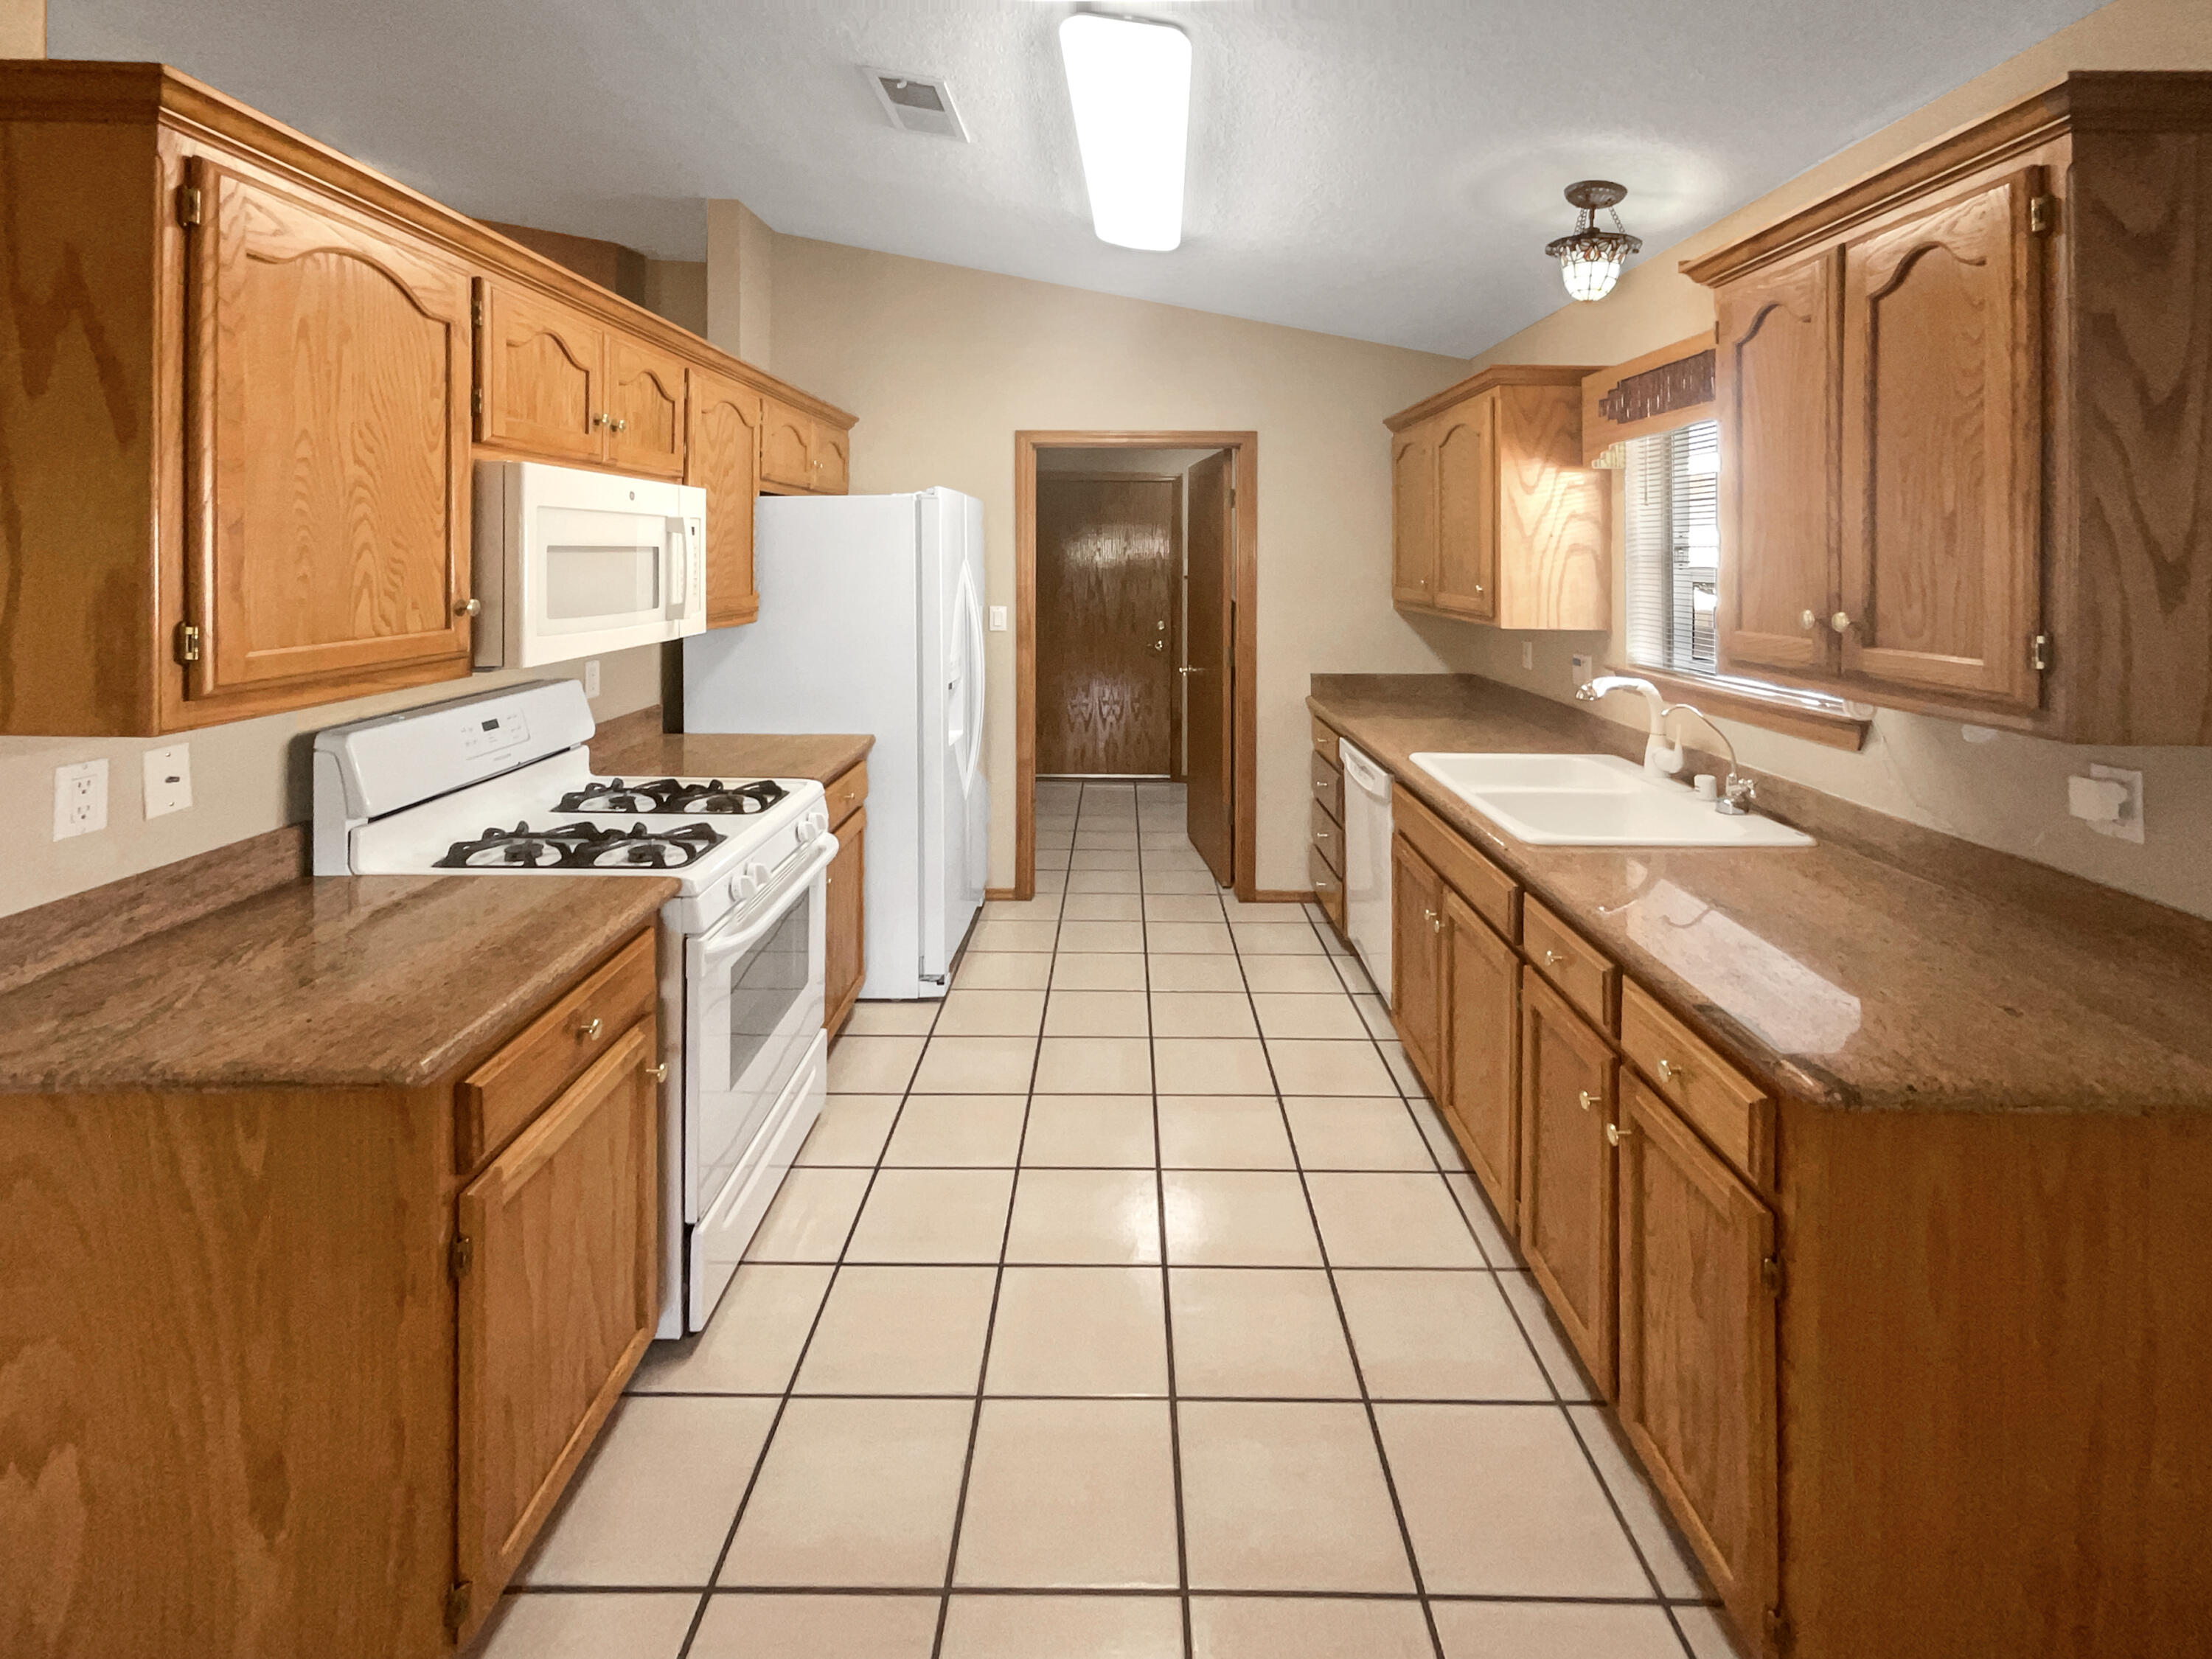 6212 Summerwood Road NW, Albuquerque, New Mexico 87120, 3 Bedrooms Bedrooms, ,2 BathroomsBathrooms,Residential,For Sale,6212 Summerwood Road NW,1061322